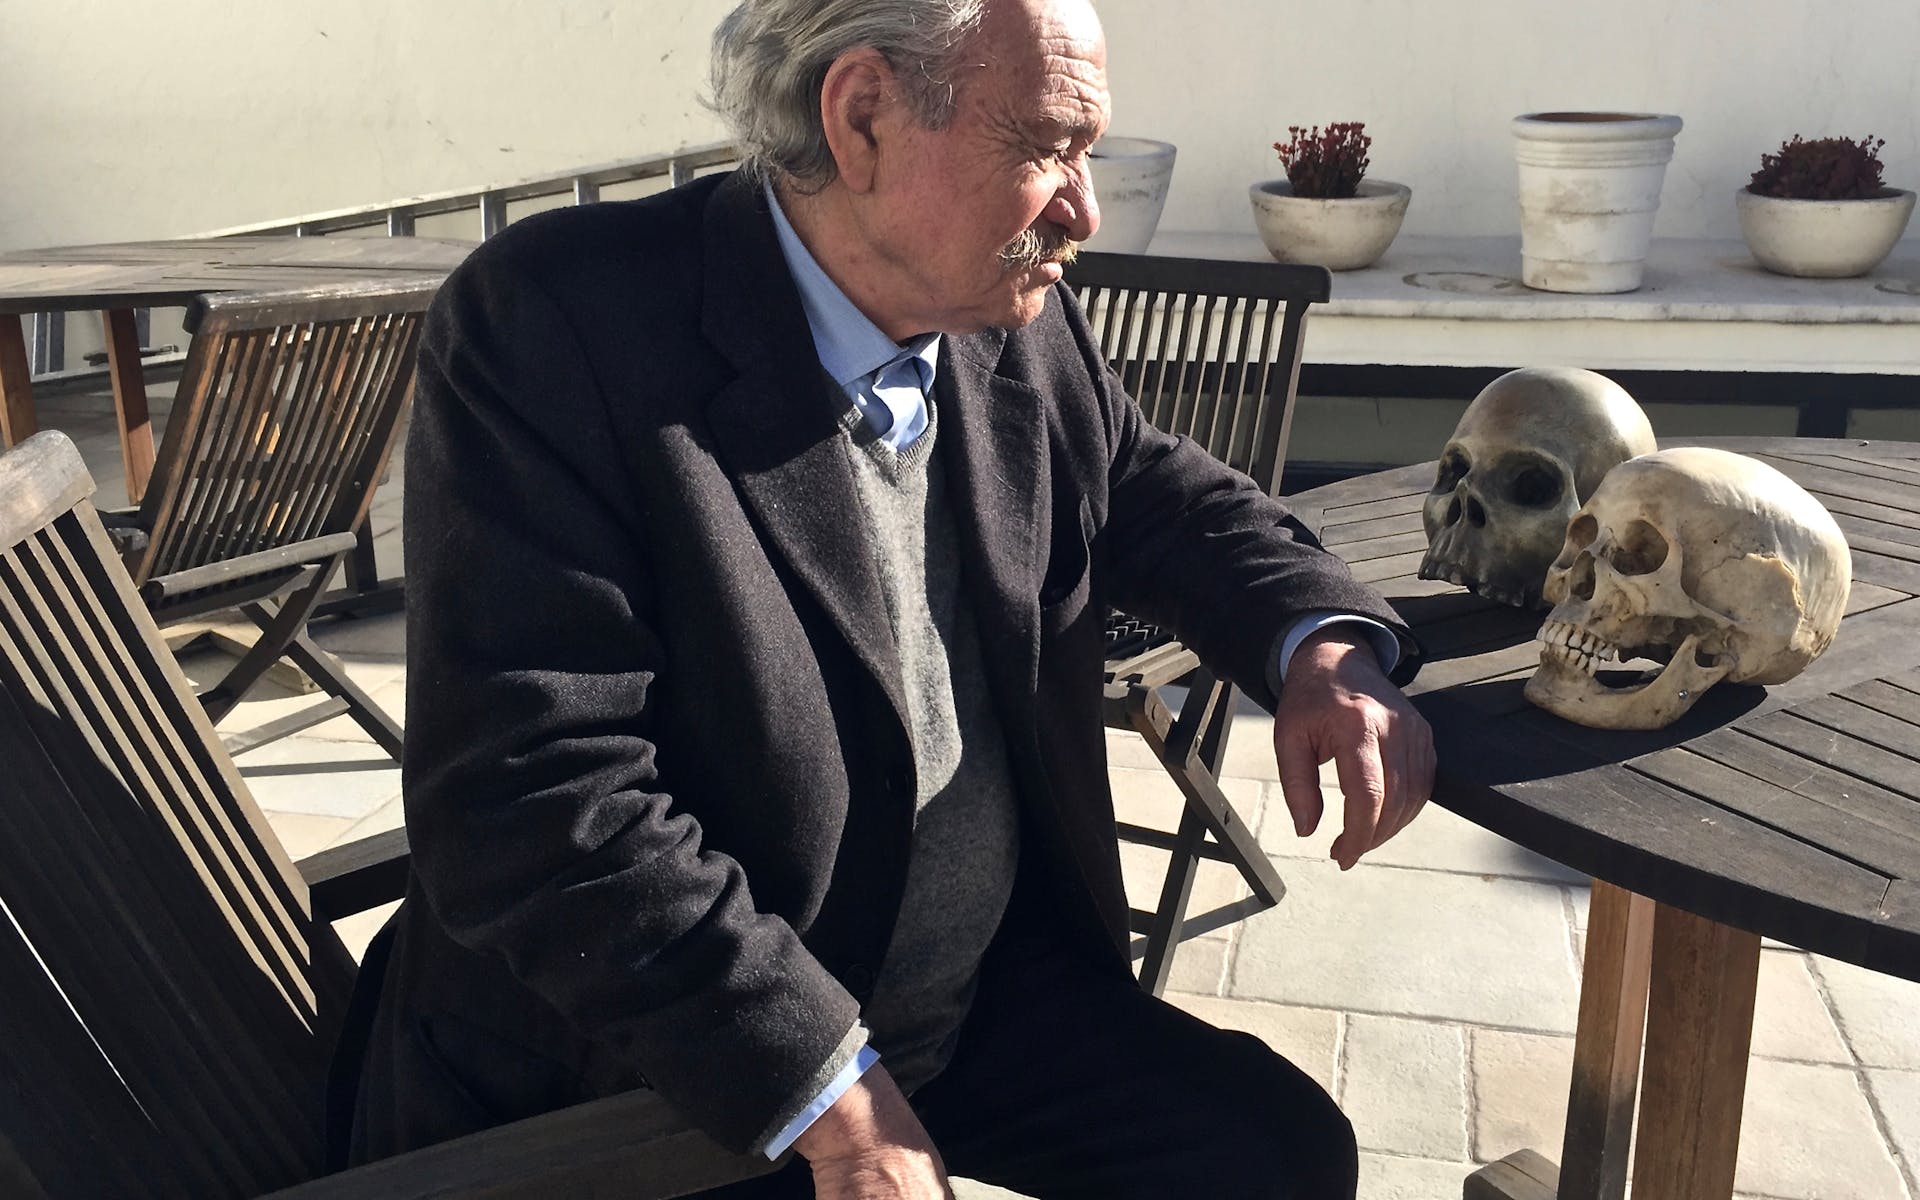 An older man in a suit sits gazing at two skulls on a table inf ront of him.